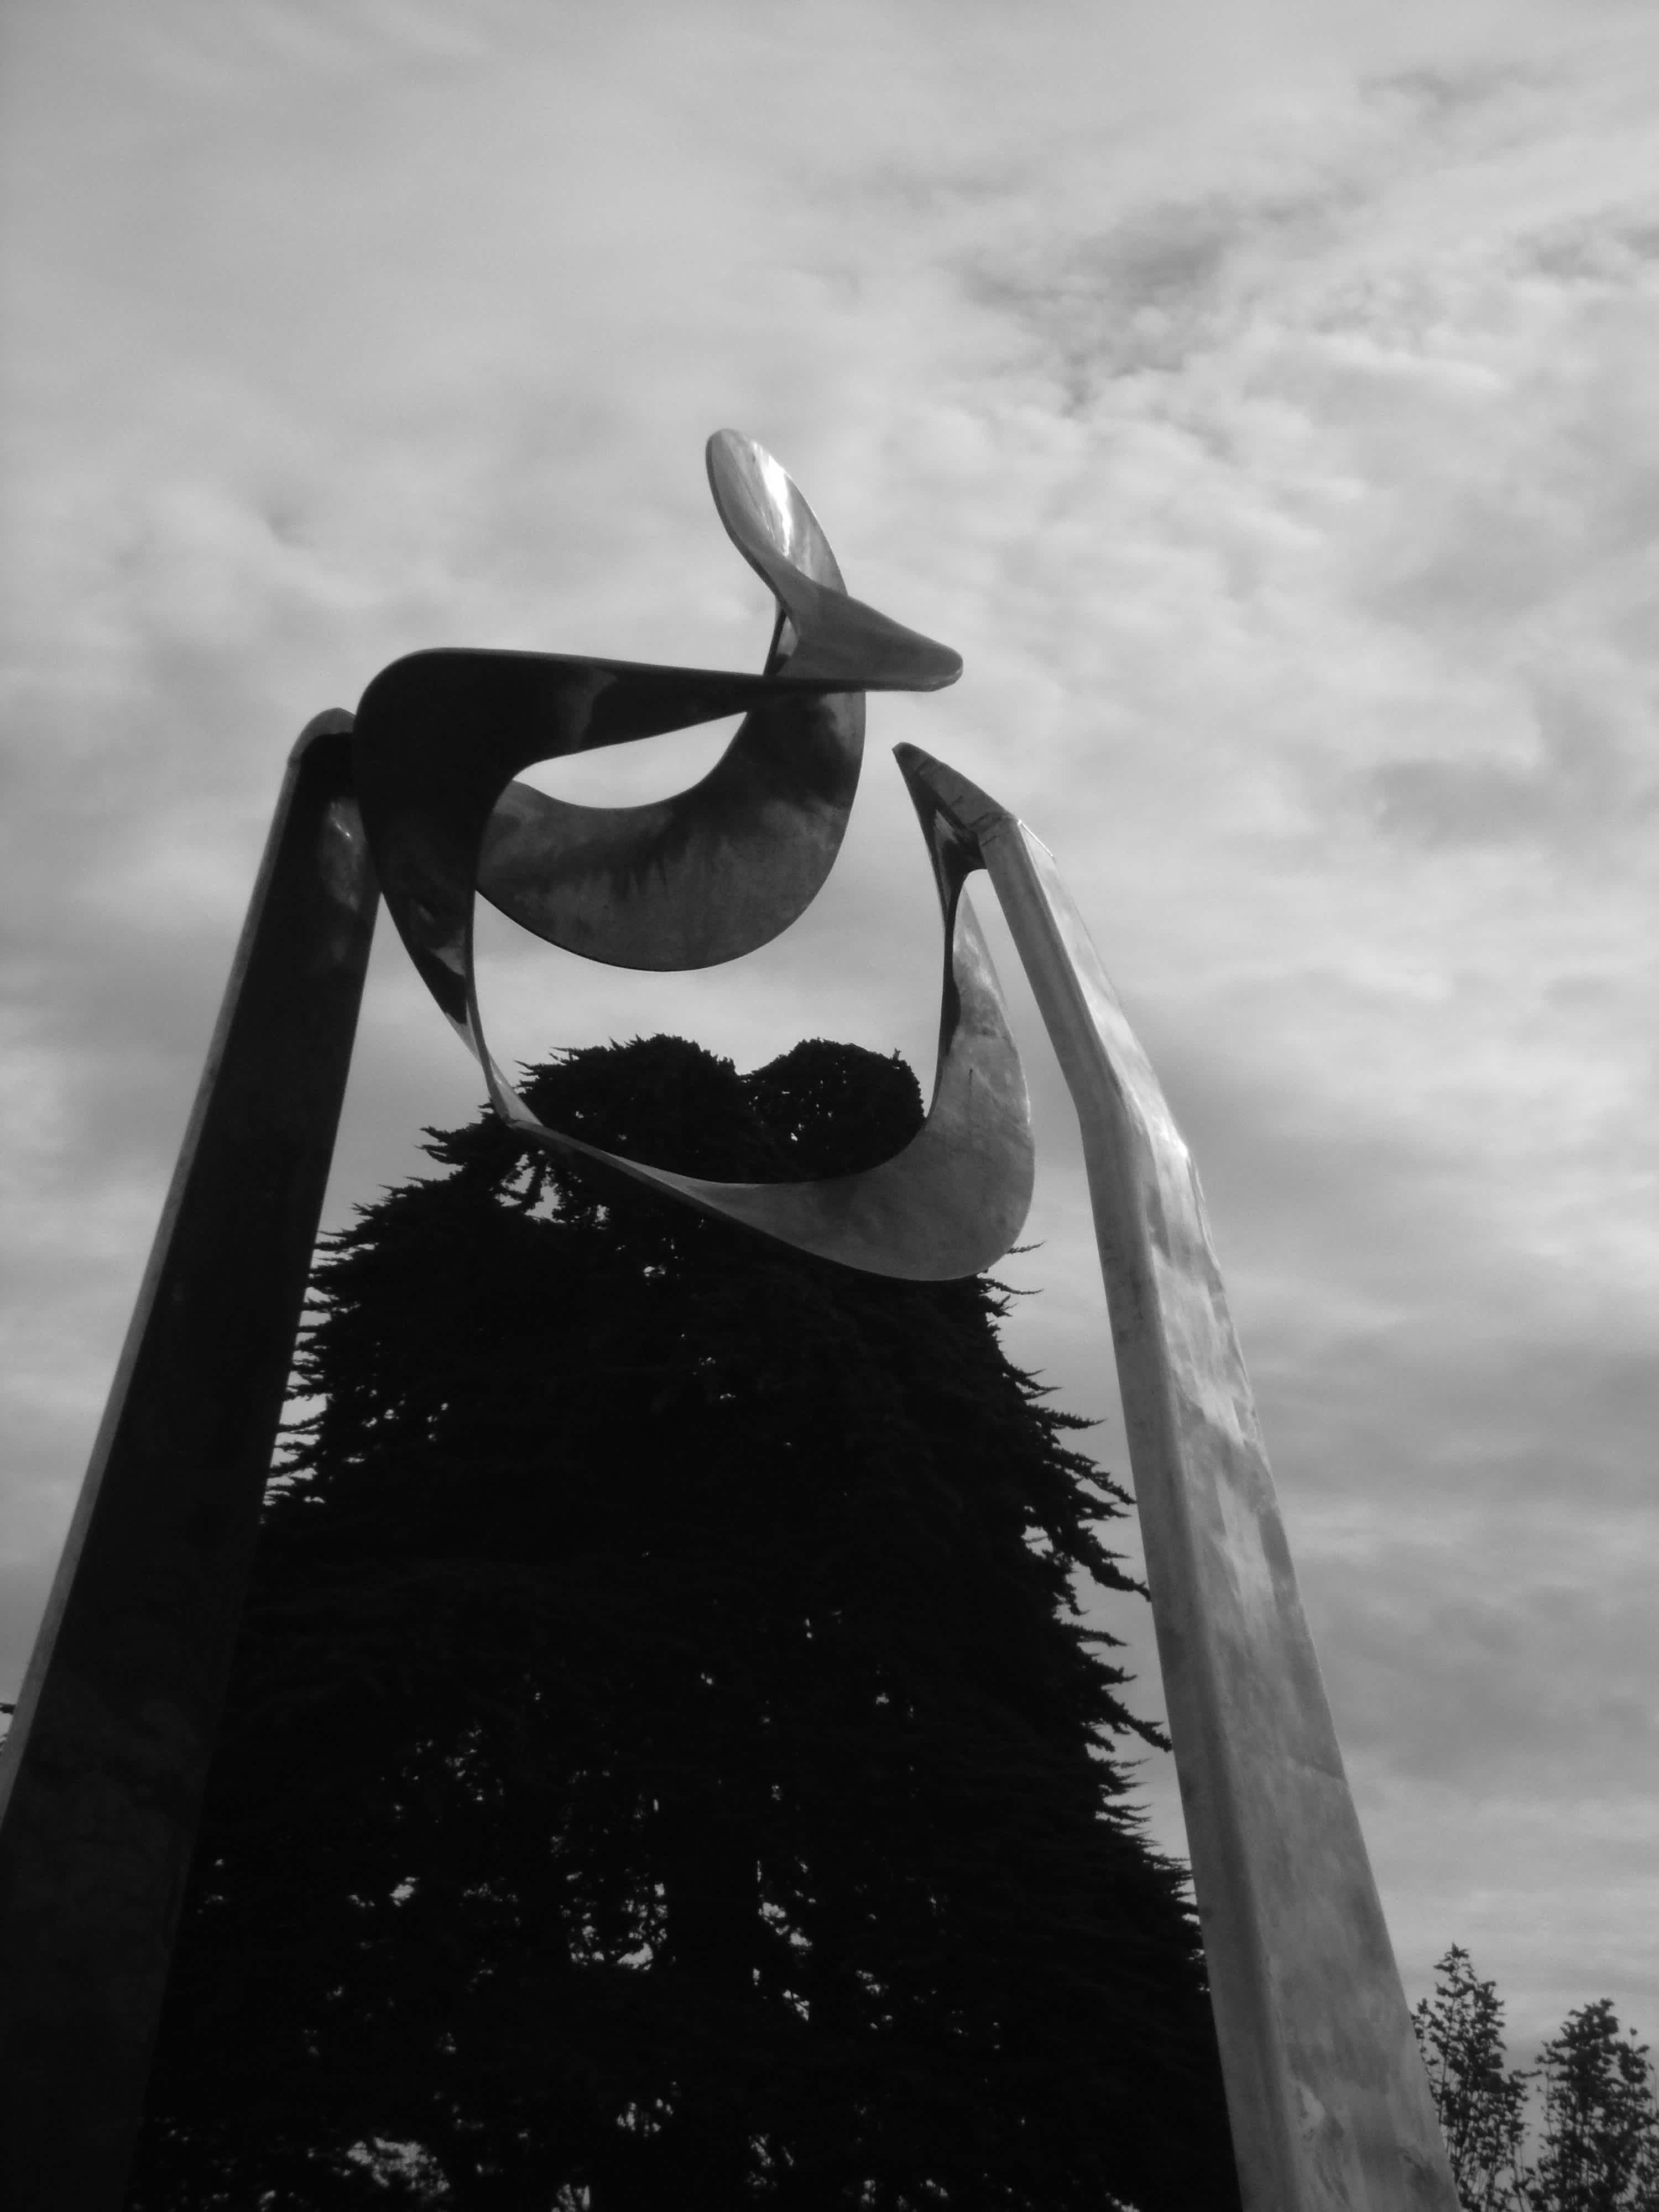 Statue reflecting the clouds in black and white in Embarcadero, San Francisco, California. 